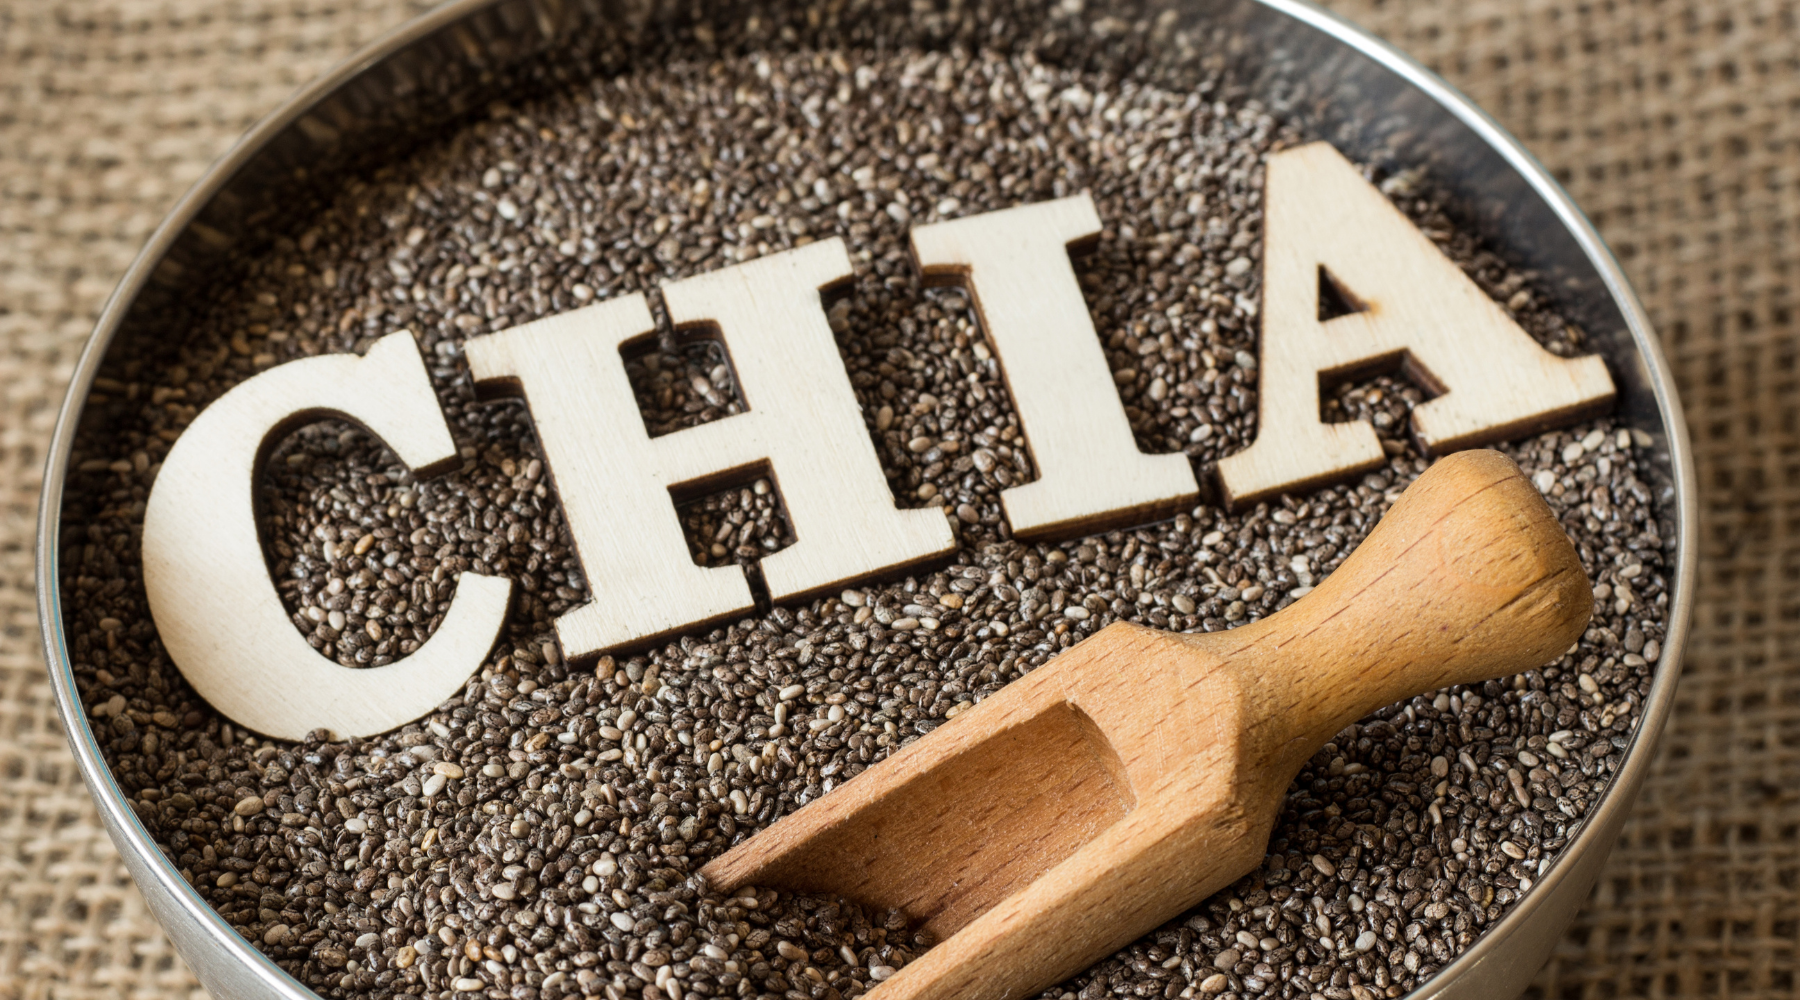 Why Are Chia Seeds Good For You? For Starters, Here Are 8 Incredible Benefits!